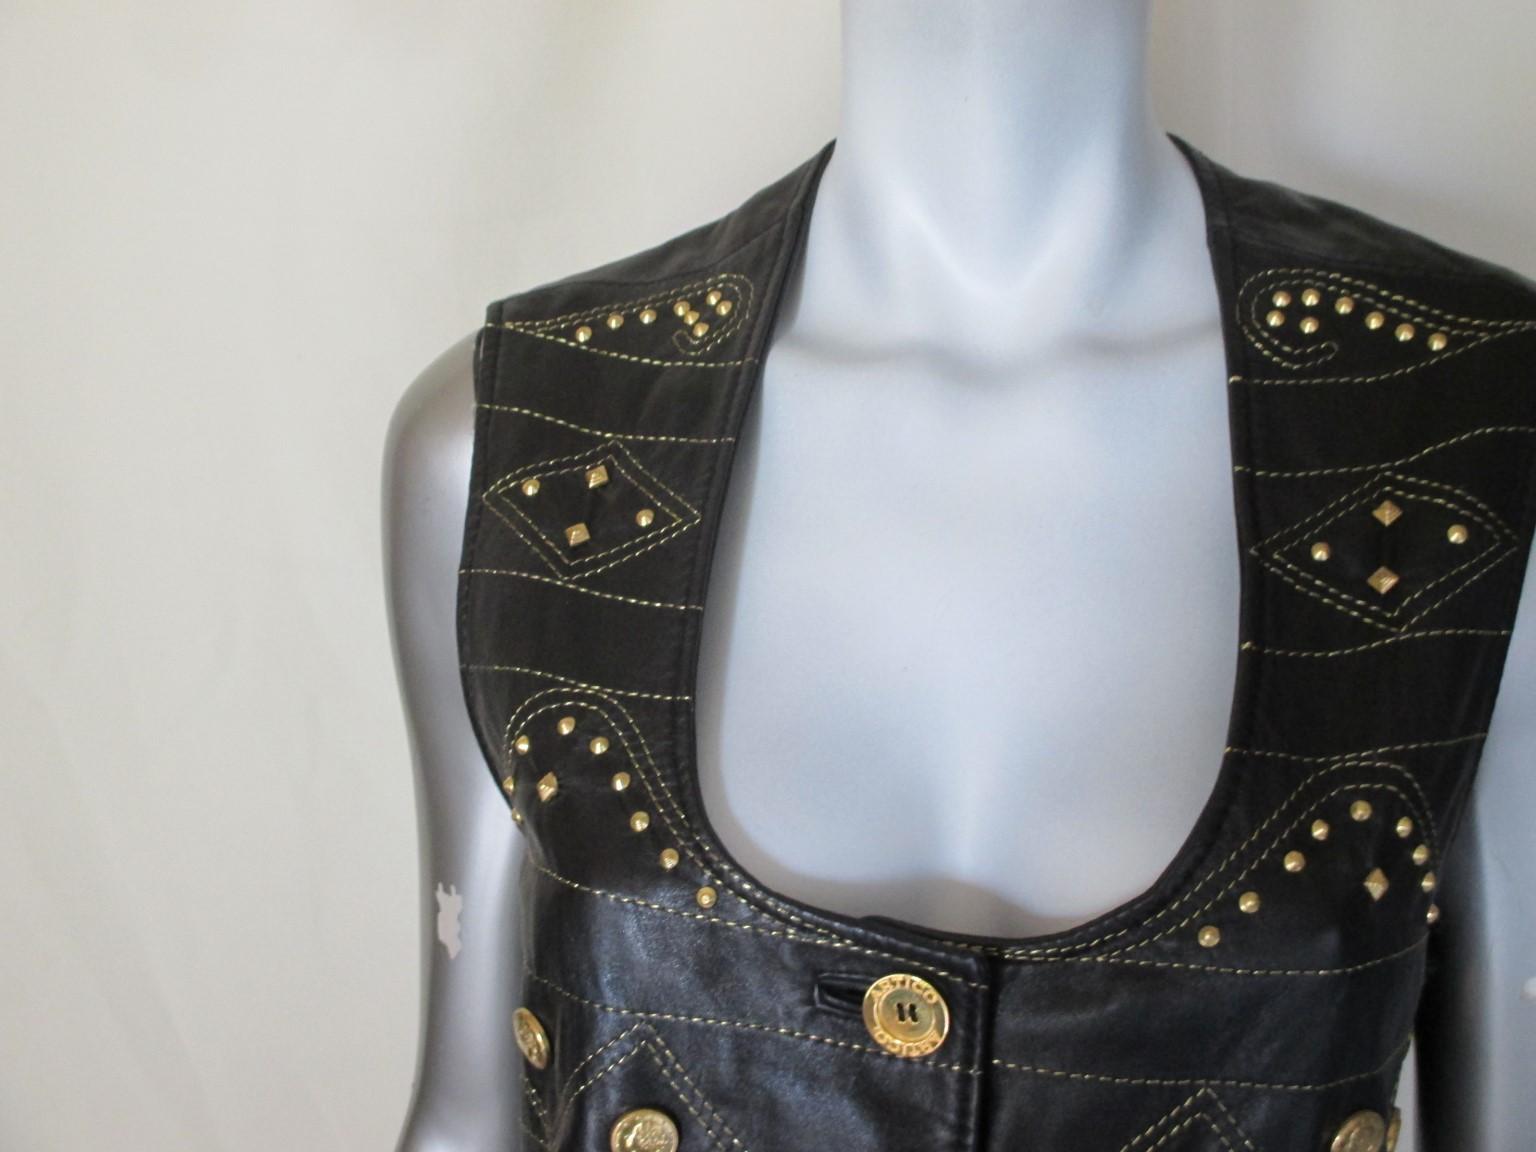 This black leather vest has no pockets, trimmed with gold toned studs and 5 gold color buttons.
Its designed by Artico, Bologna, Italy
Versace style
Size is Italian 44/ US 8-10/EU 40
Please note that vintage items are not new and therefore might